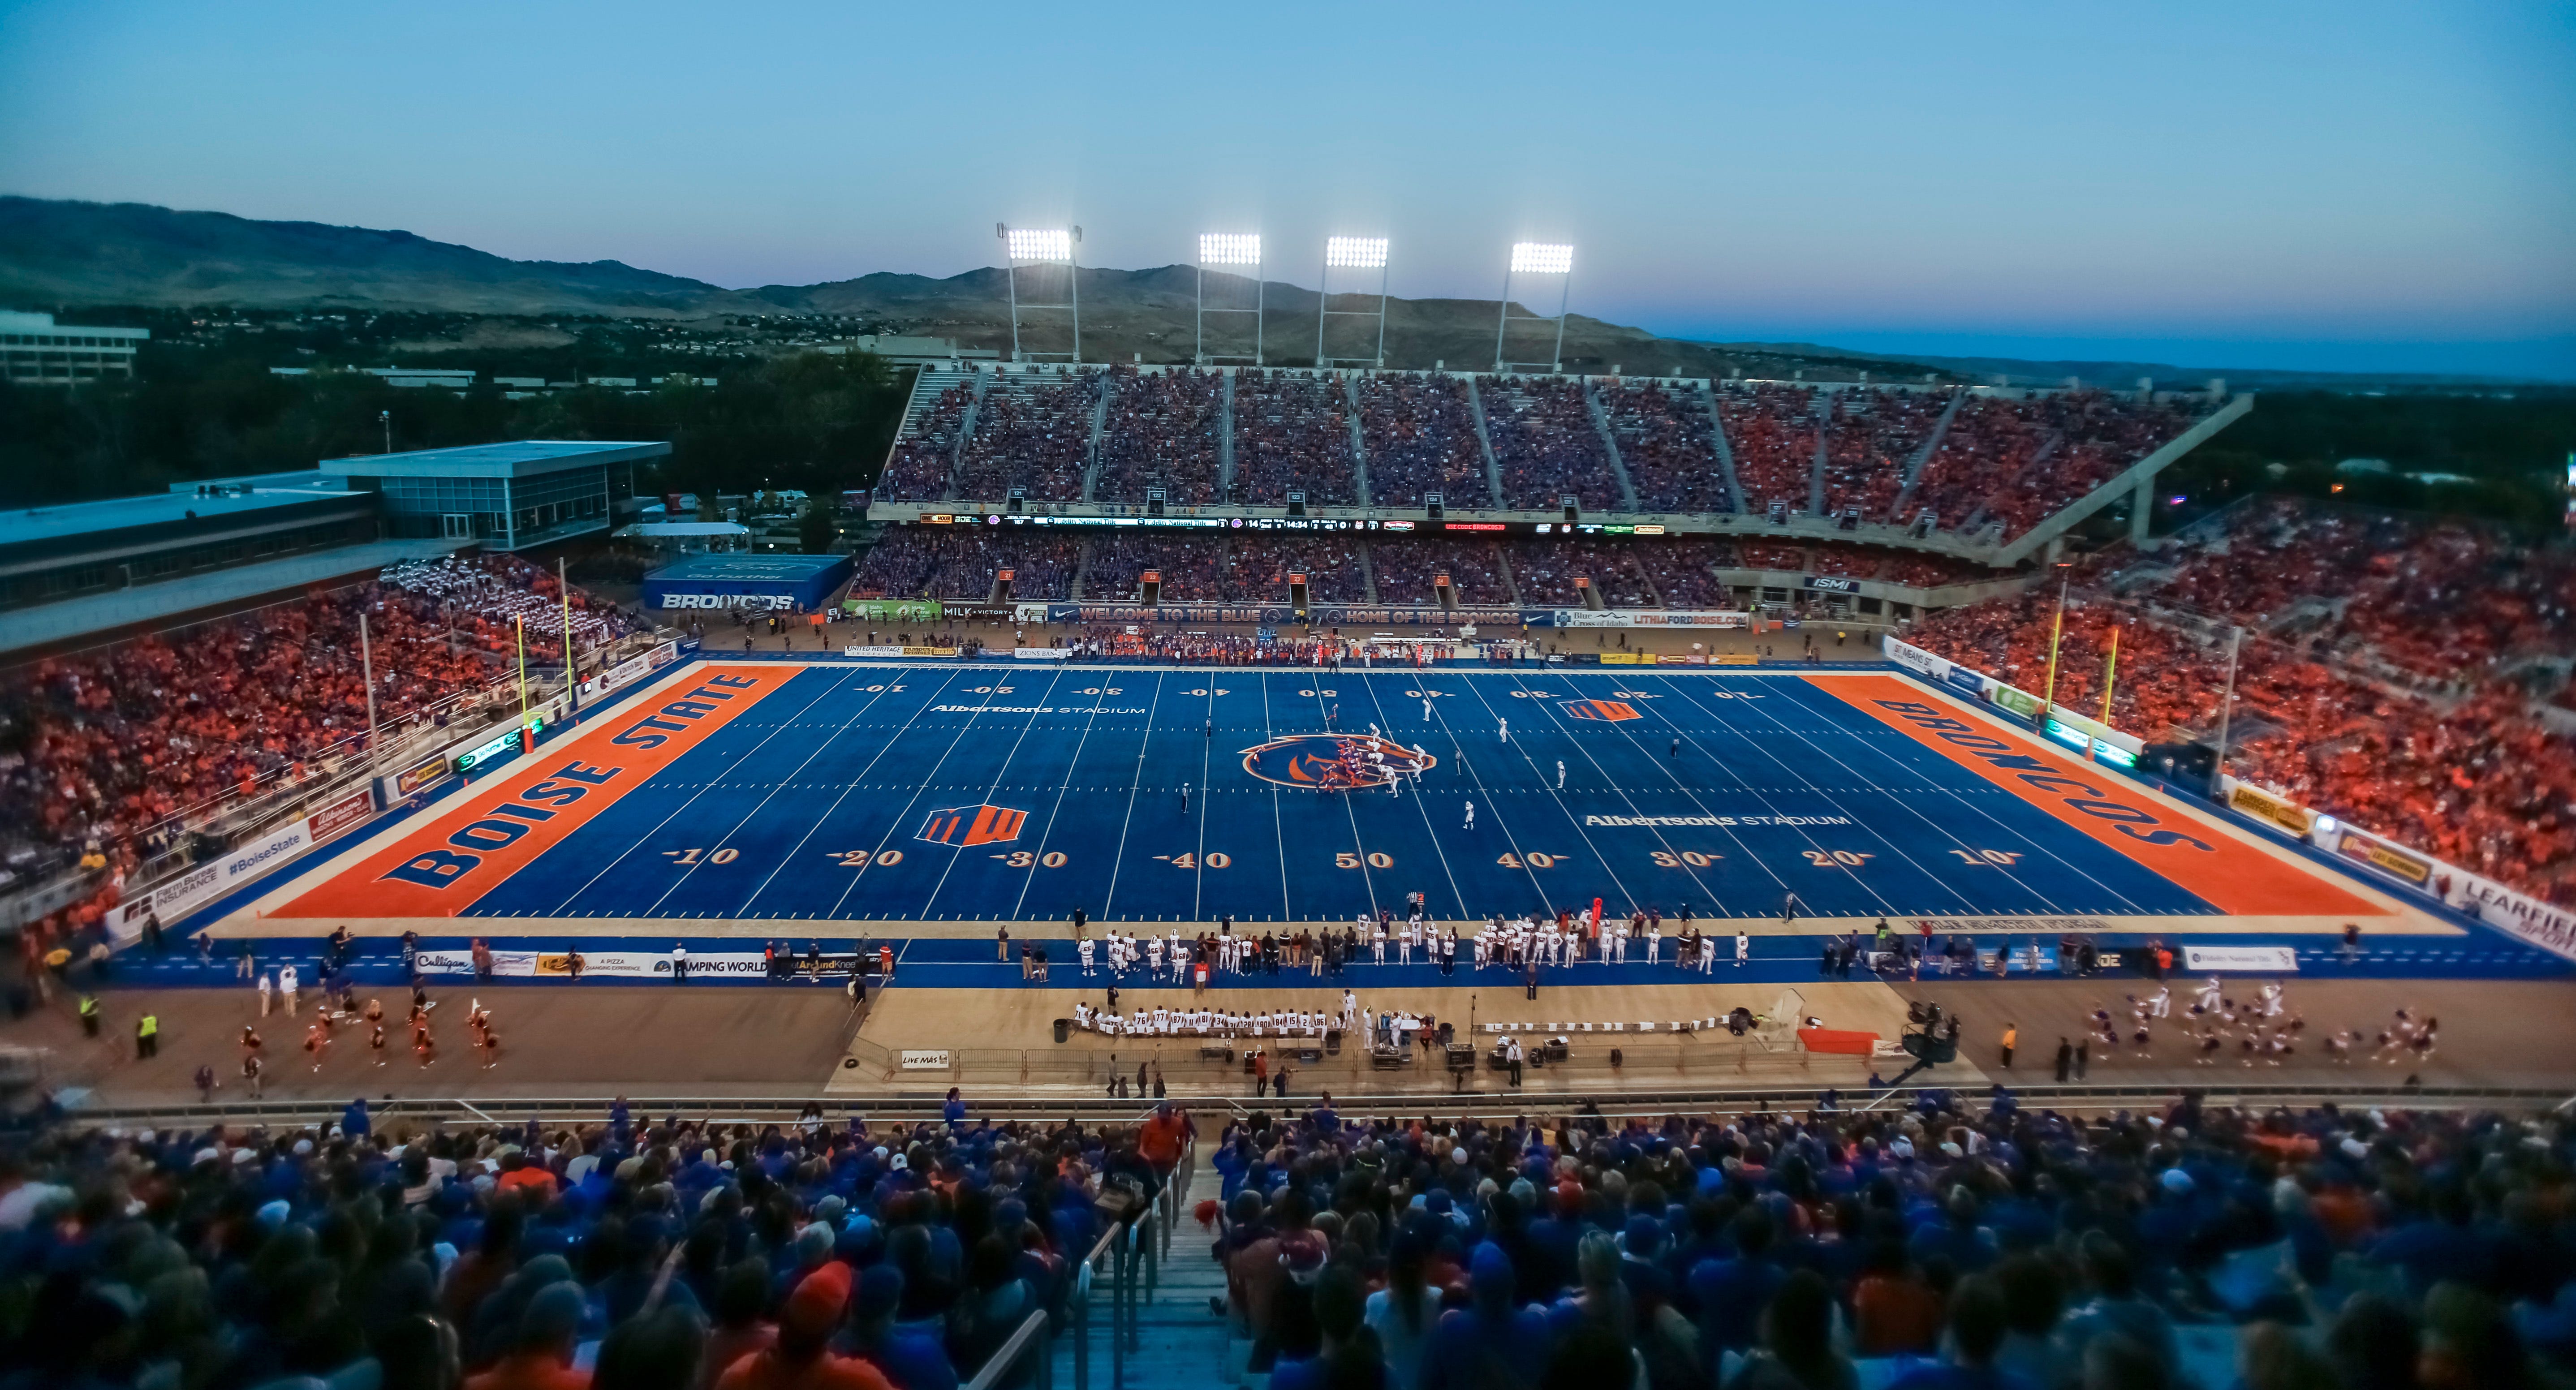 Boise State's blue turf was a genius idea for the Broncos' brand